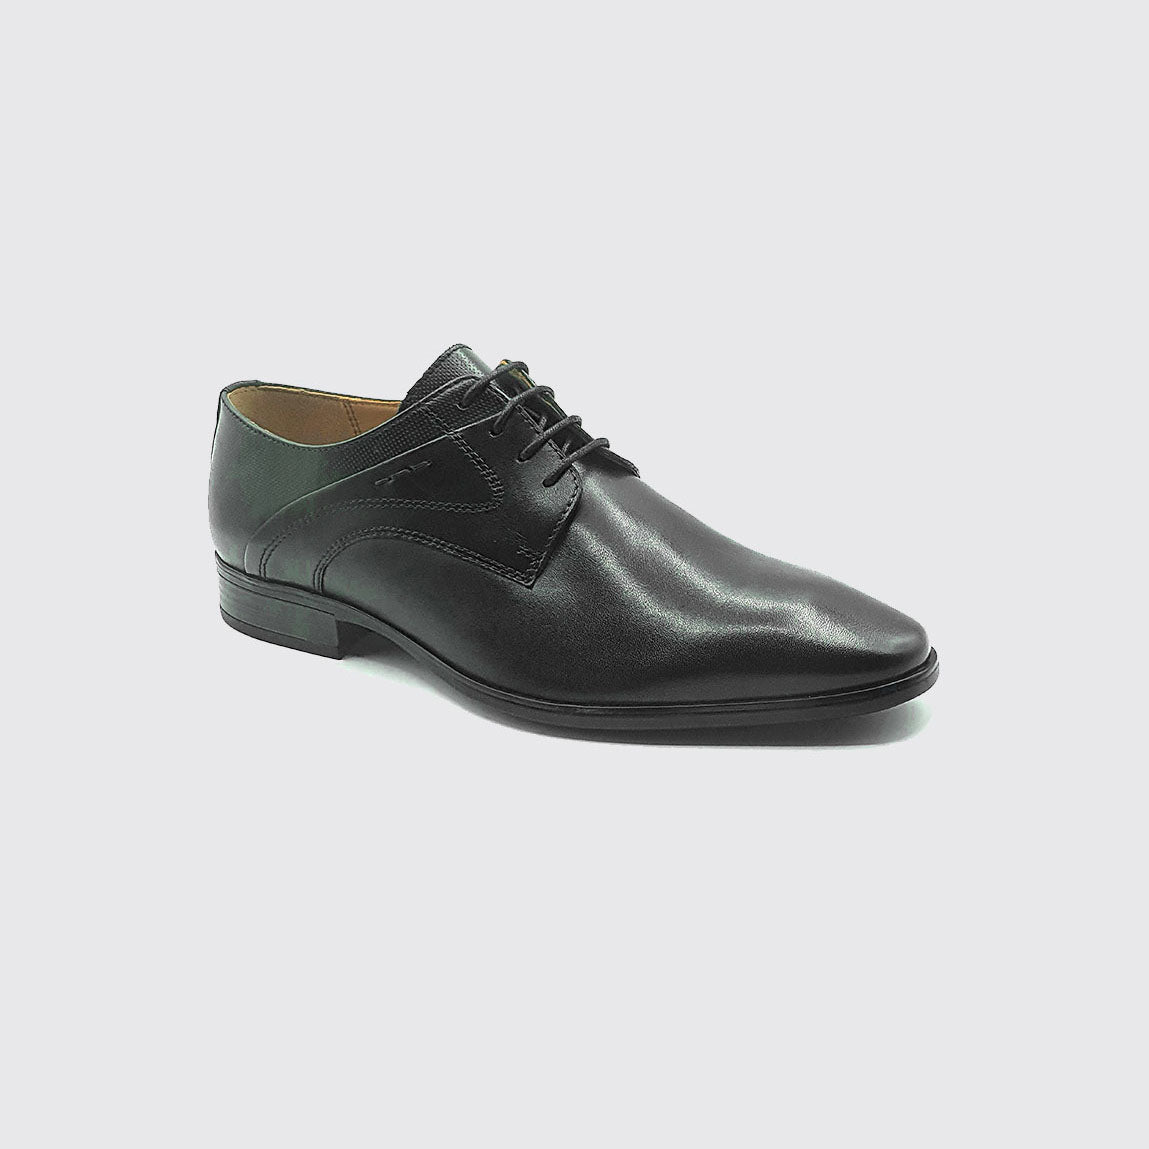 Frontal pair view of the Dubarry Dempsey Black Formal Dress Shoes.